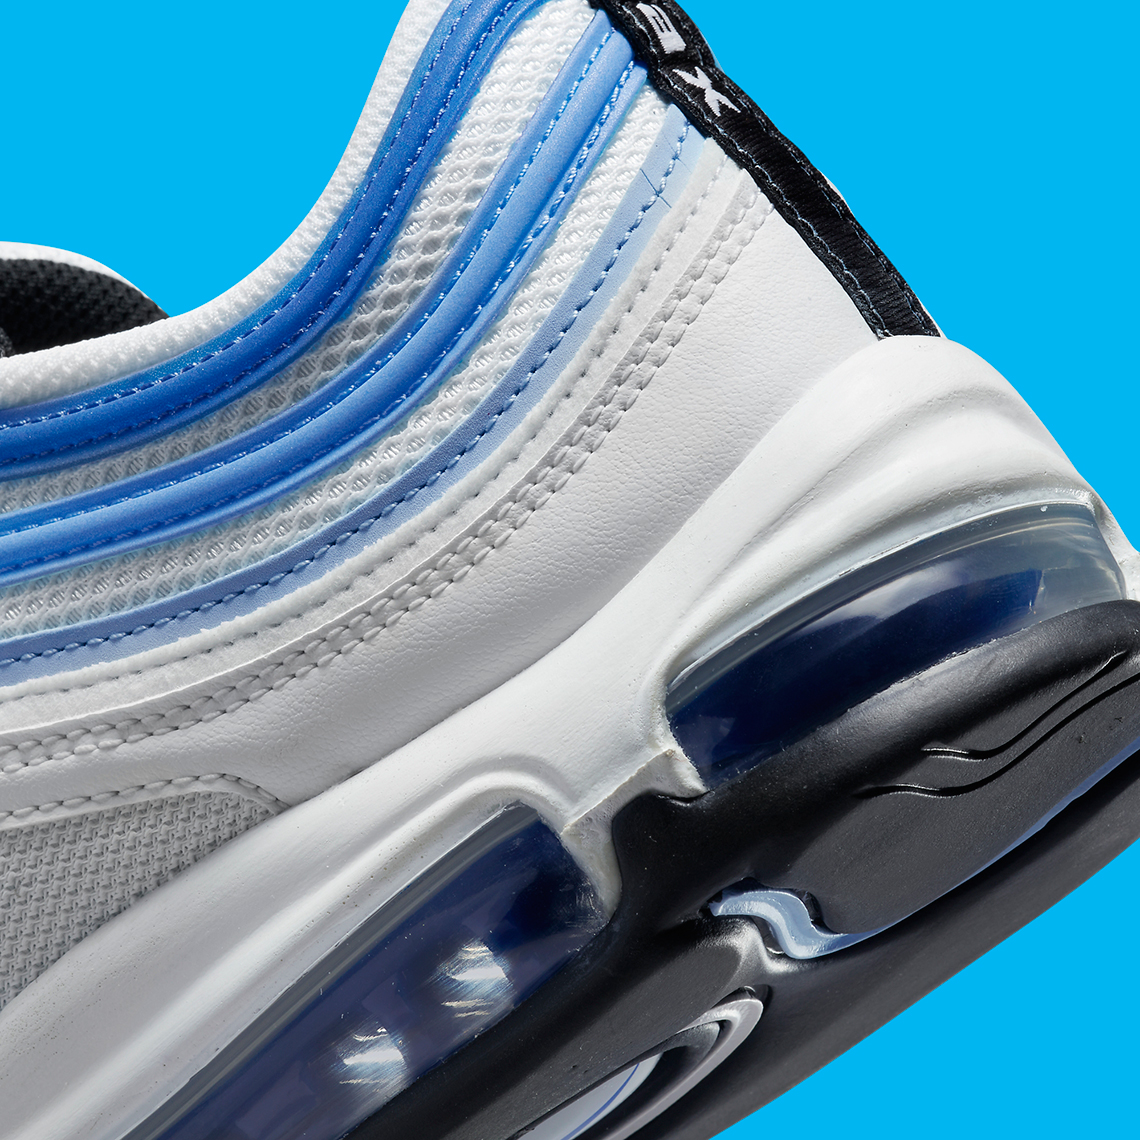 nike-air-max-97-blueberry-do8900-100-release-date-6.jpg